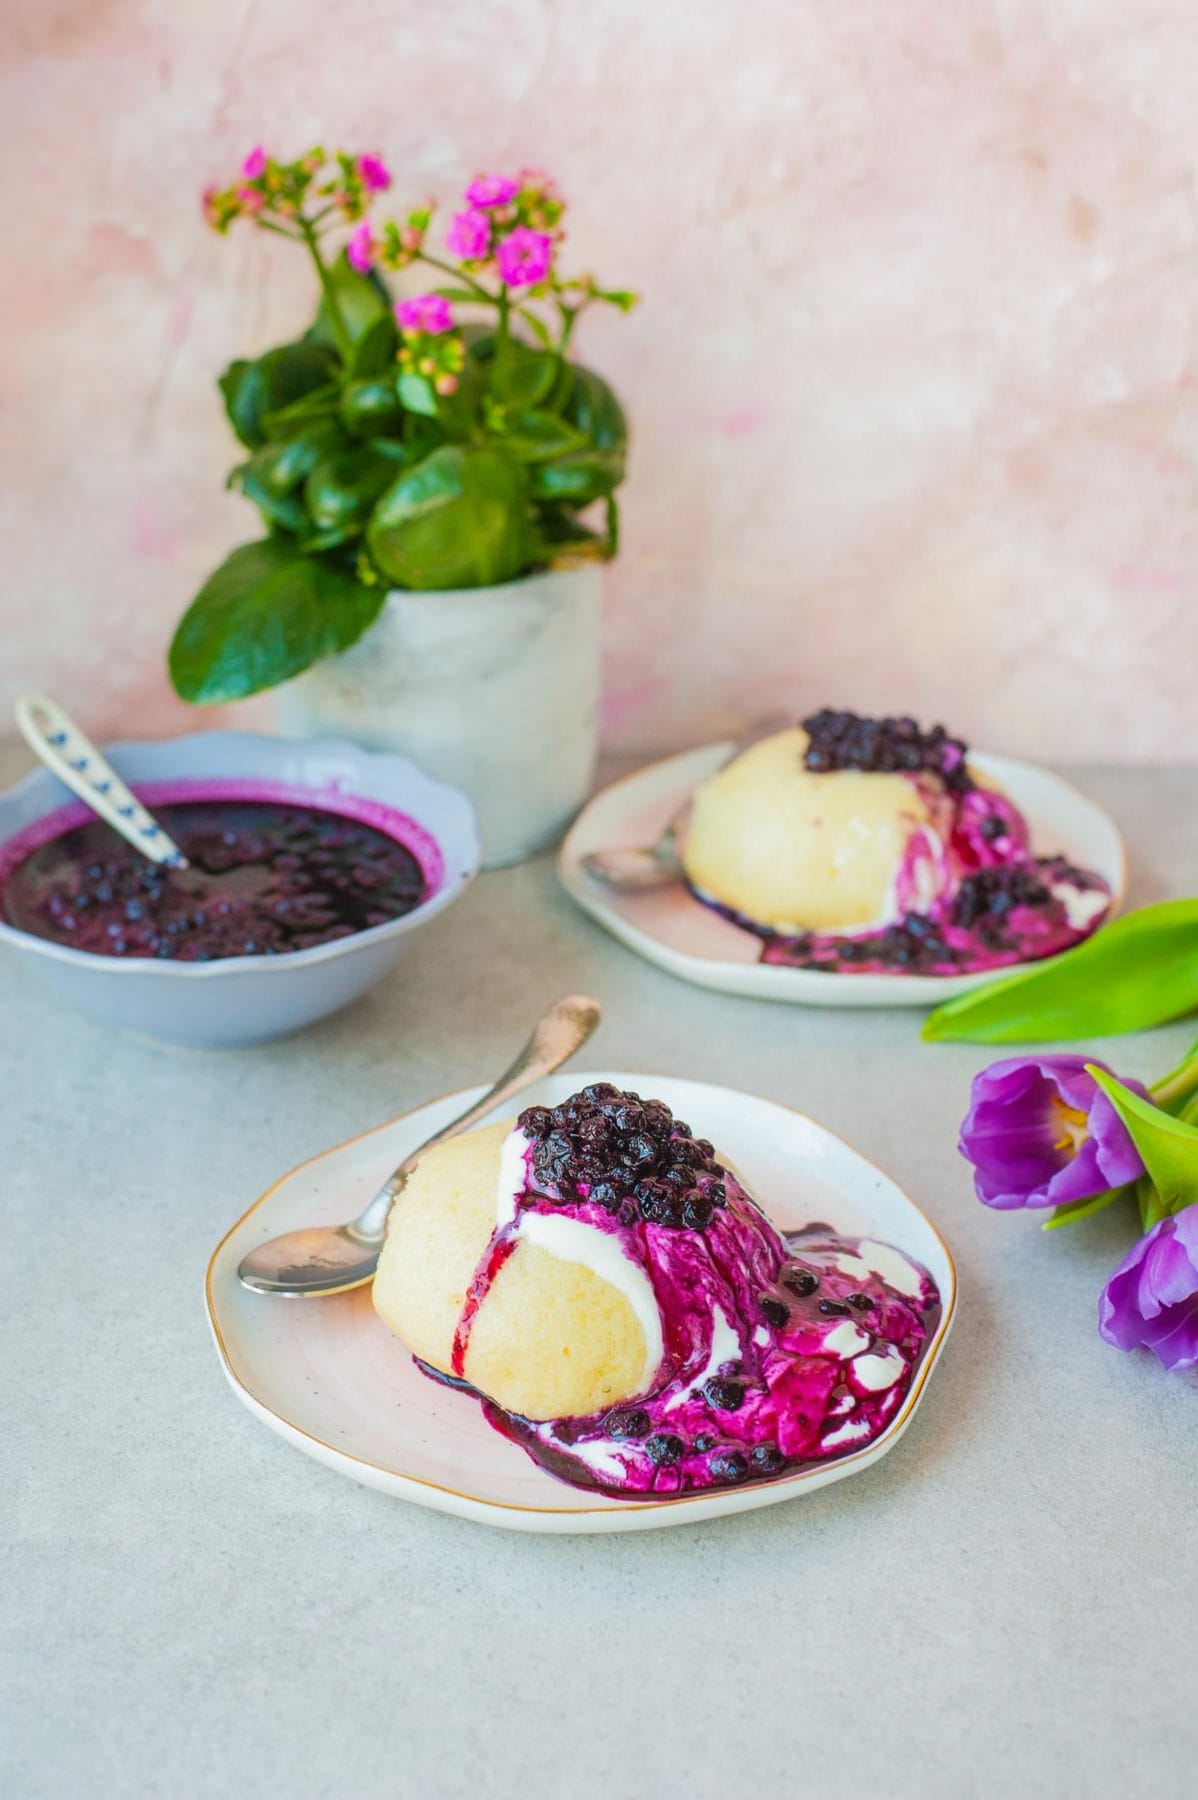 Two plates with steamed buns with blueberry sauce